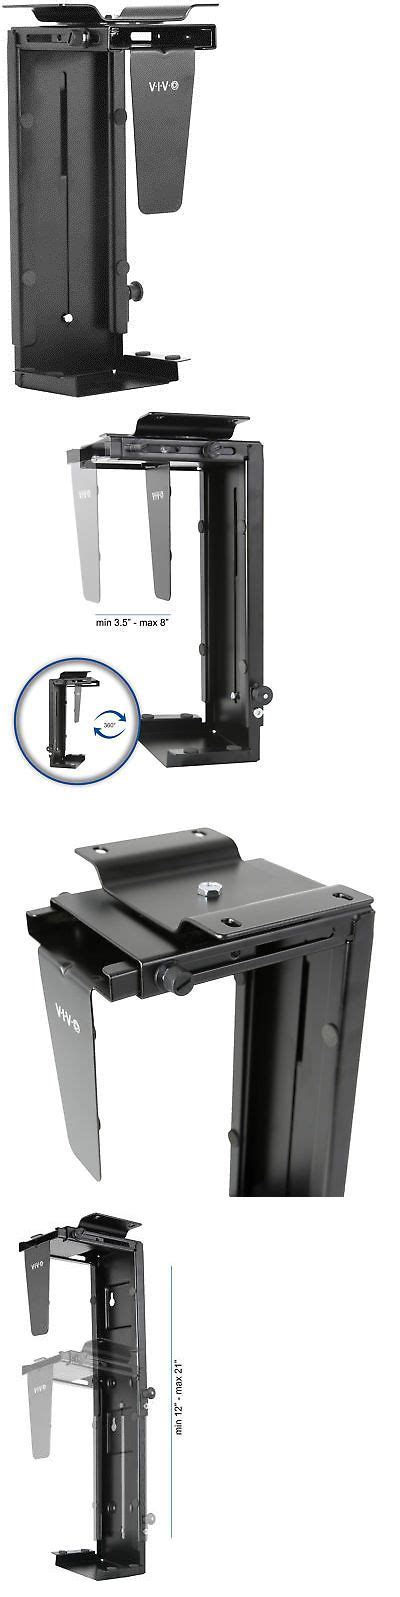 We base our choices on expert and user reviews, buyers' comments, and our own impressions, separating the wheat from the chaff. Adjustable Under-Desk and Wall PC Mount | Computer Case ...